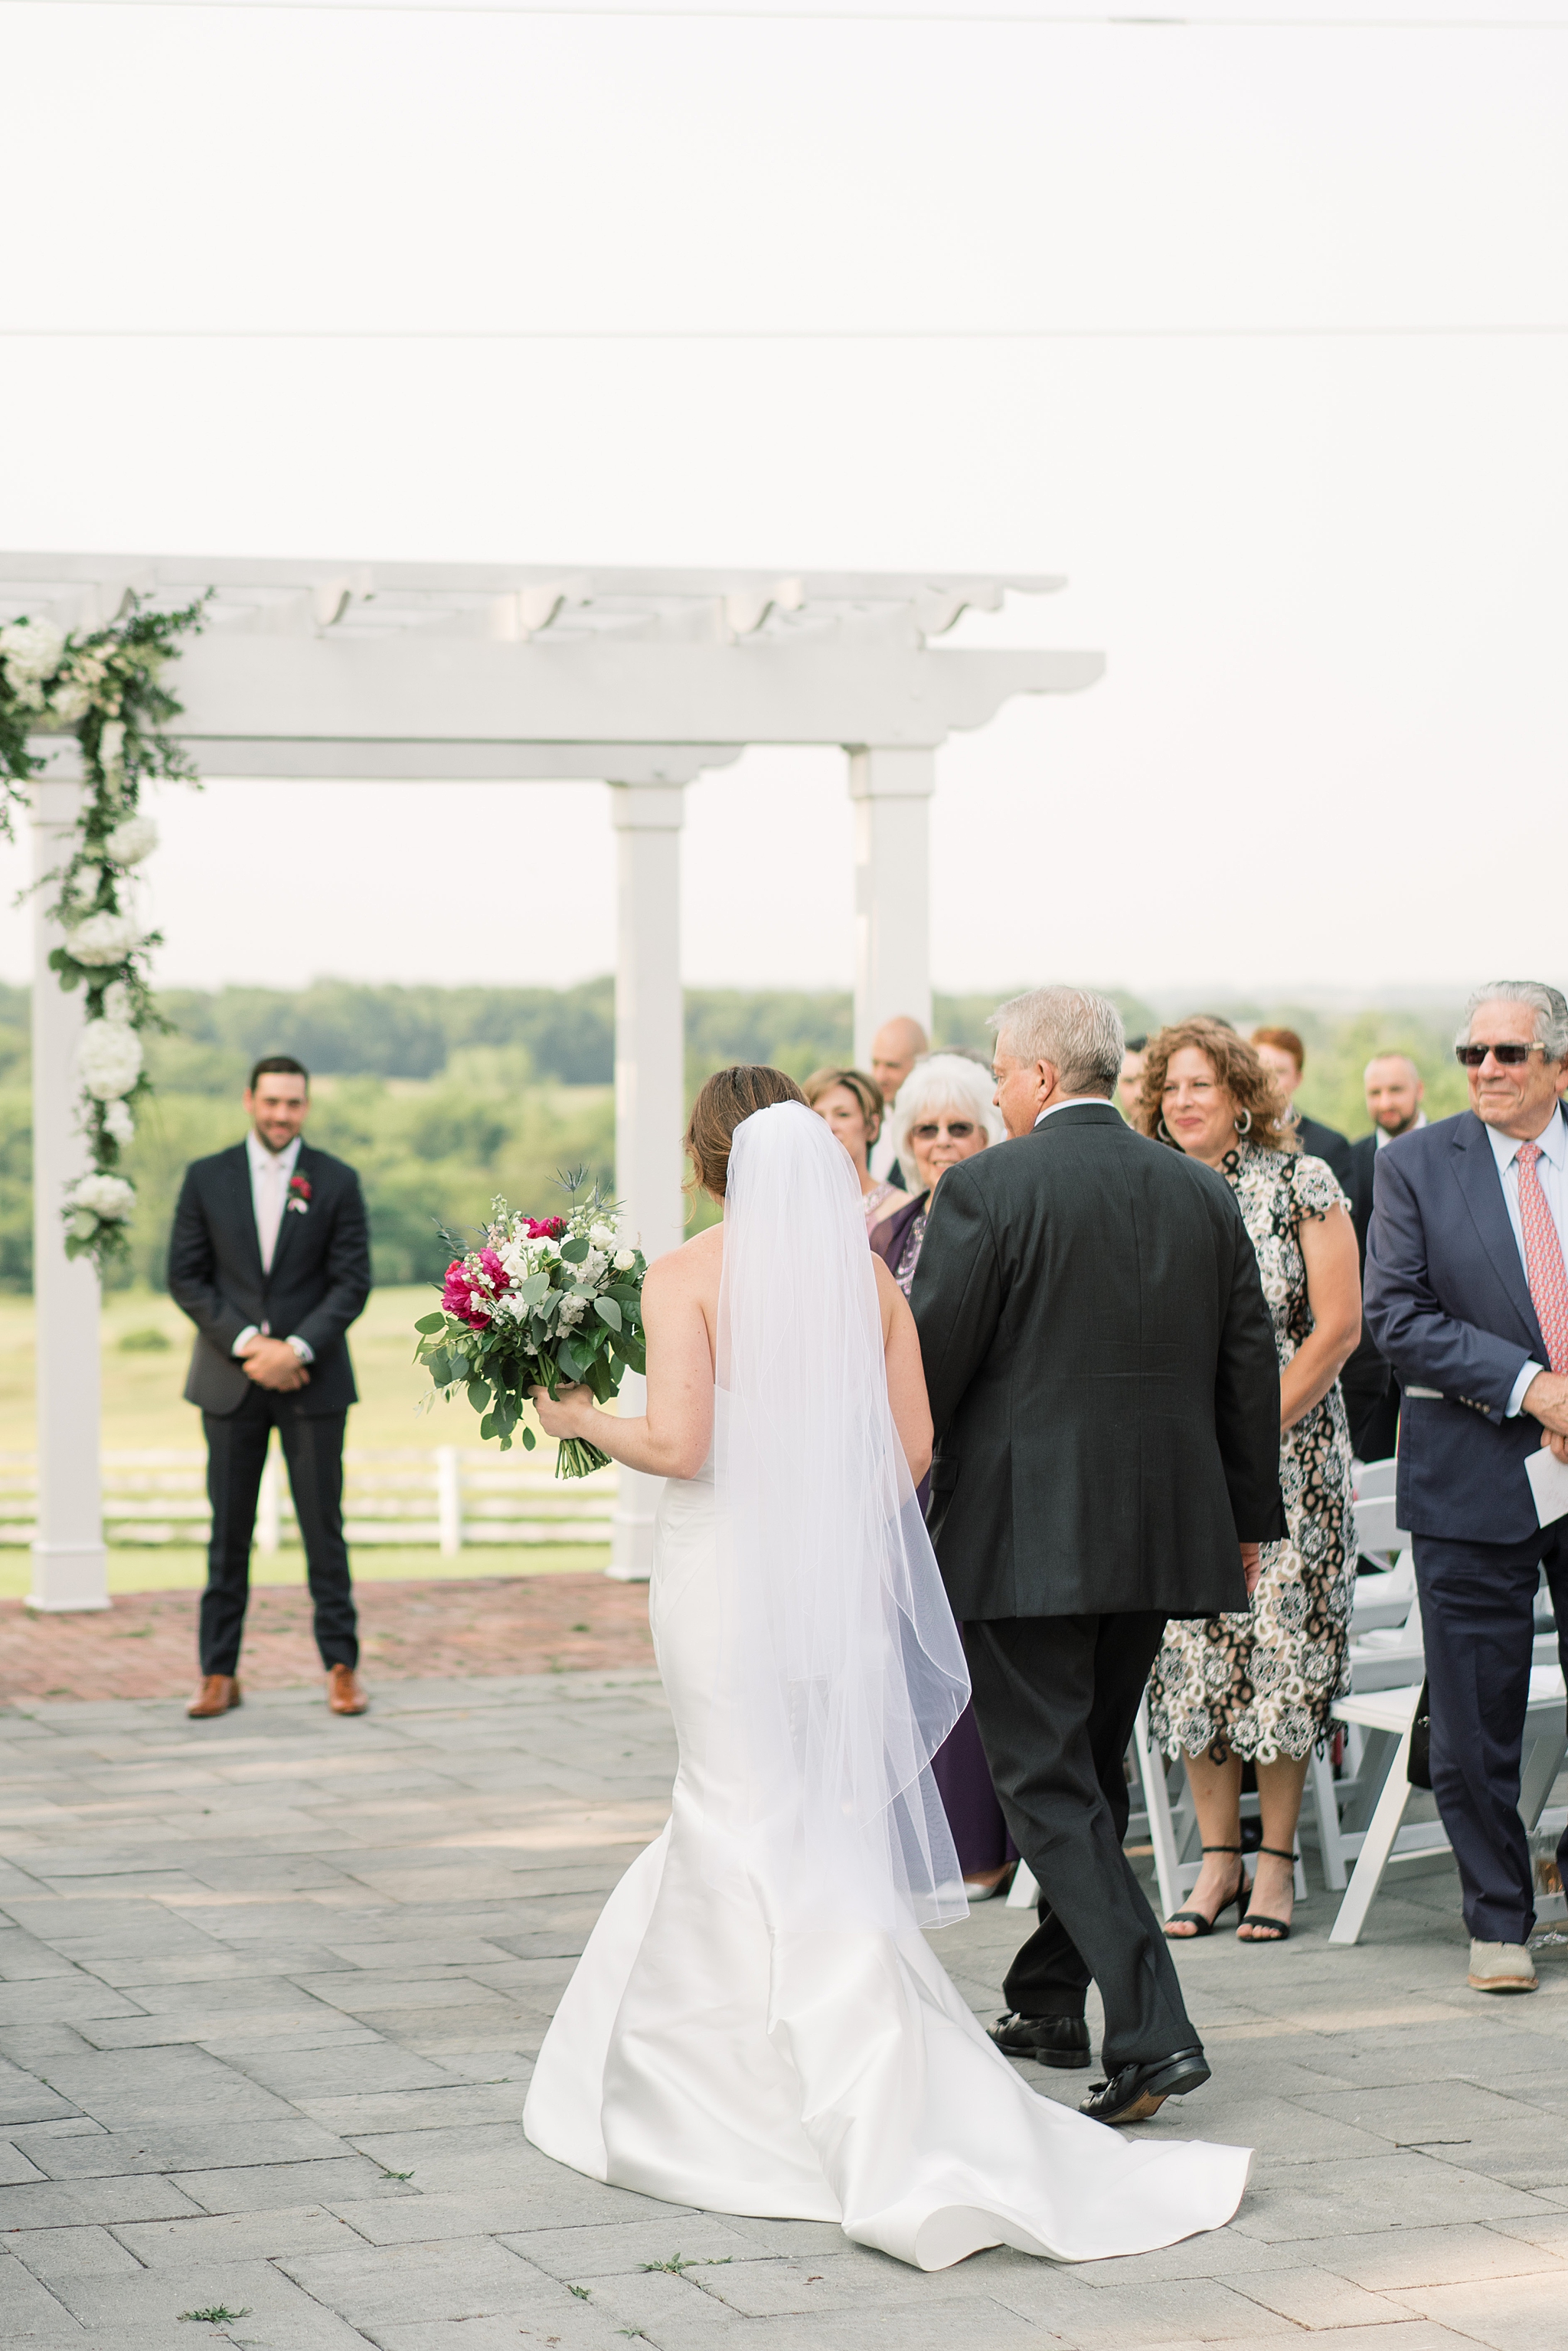 A summer wedding at Raspberry Plain Manor in Leesburg, VA featuring a cream and gold color palette with pops of greenery.